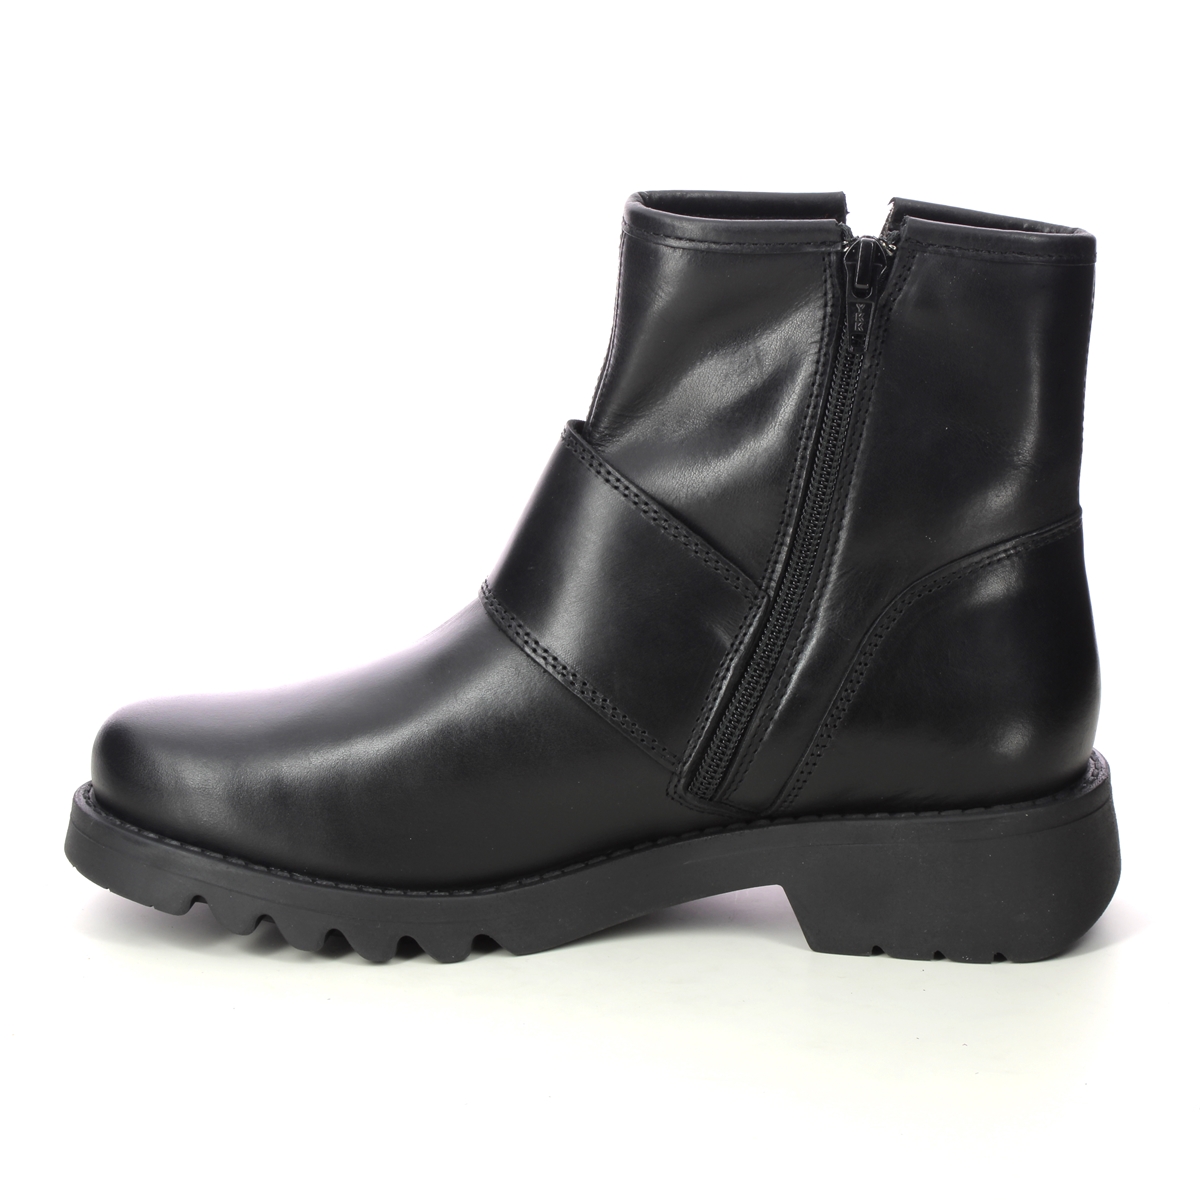 Fly London Rily Ronin Black leather Womens ankle boots P144991-000